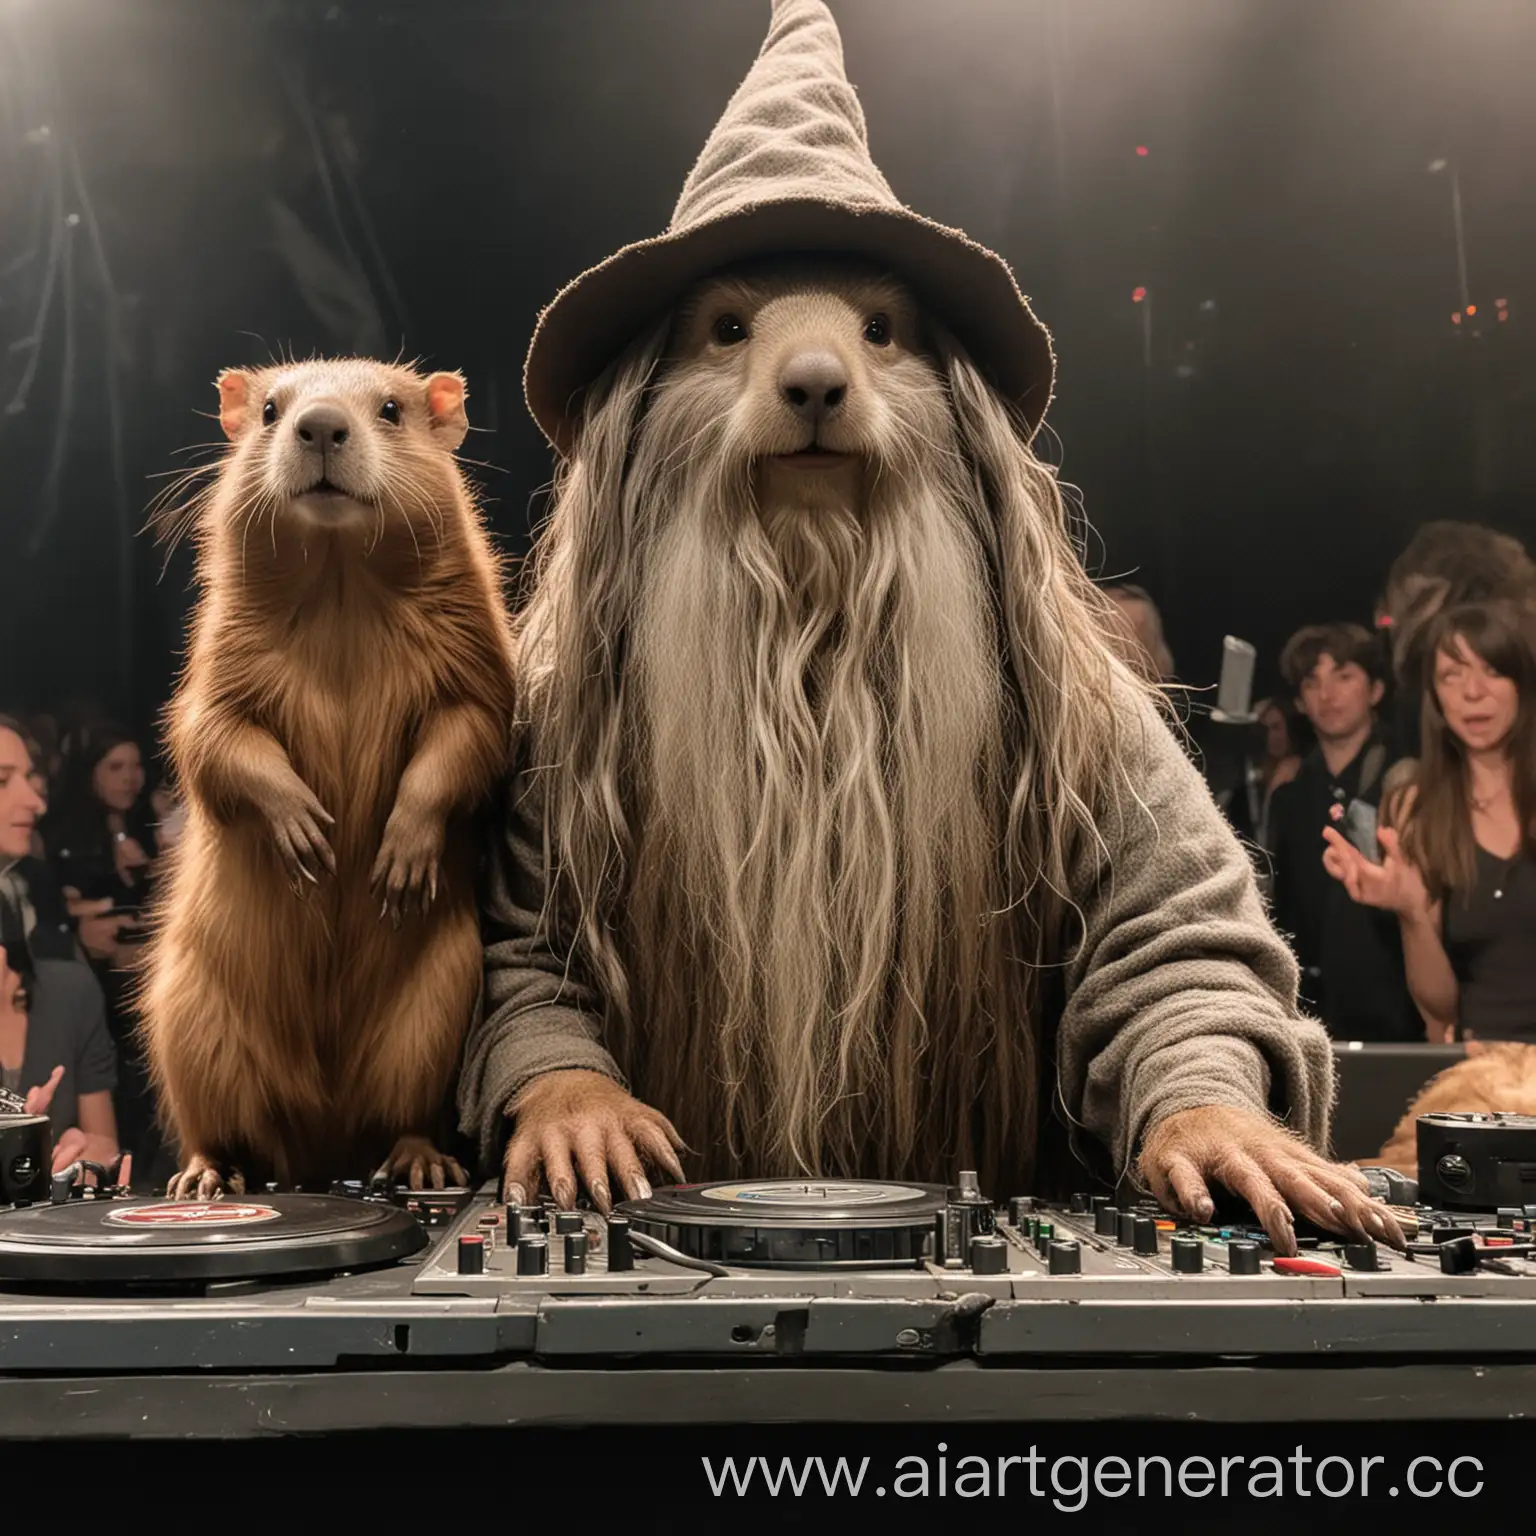 Beaver-DJ-Spins-with-Gandalf-from-Lord-of-the-Rings